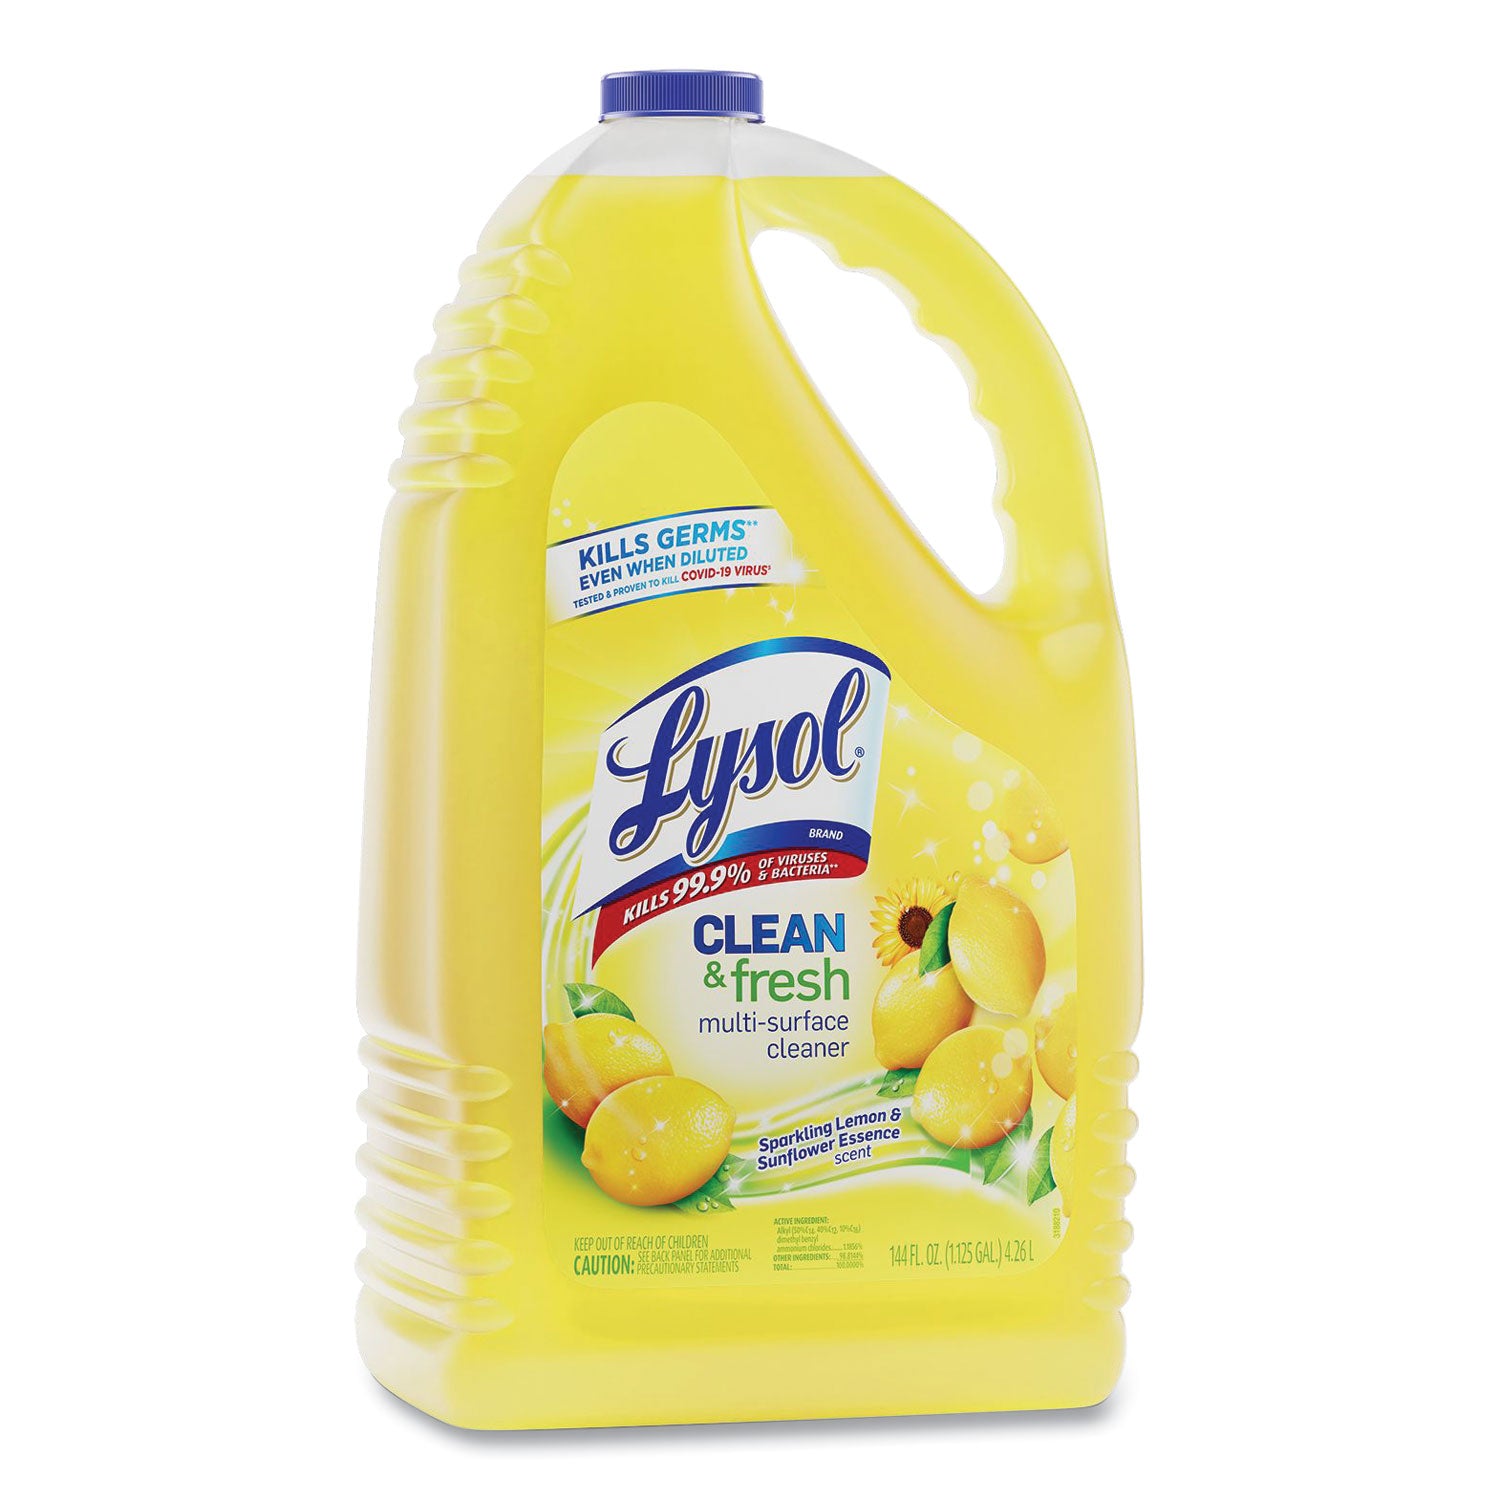 clean-and-fresh-multi-surface-cleaner-sparkling-lemon-and-sunflower-essence-144-oz-bottle_rac77617ea - 3